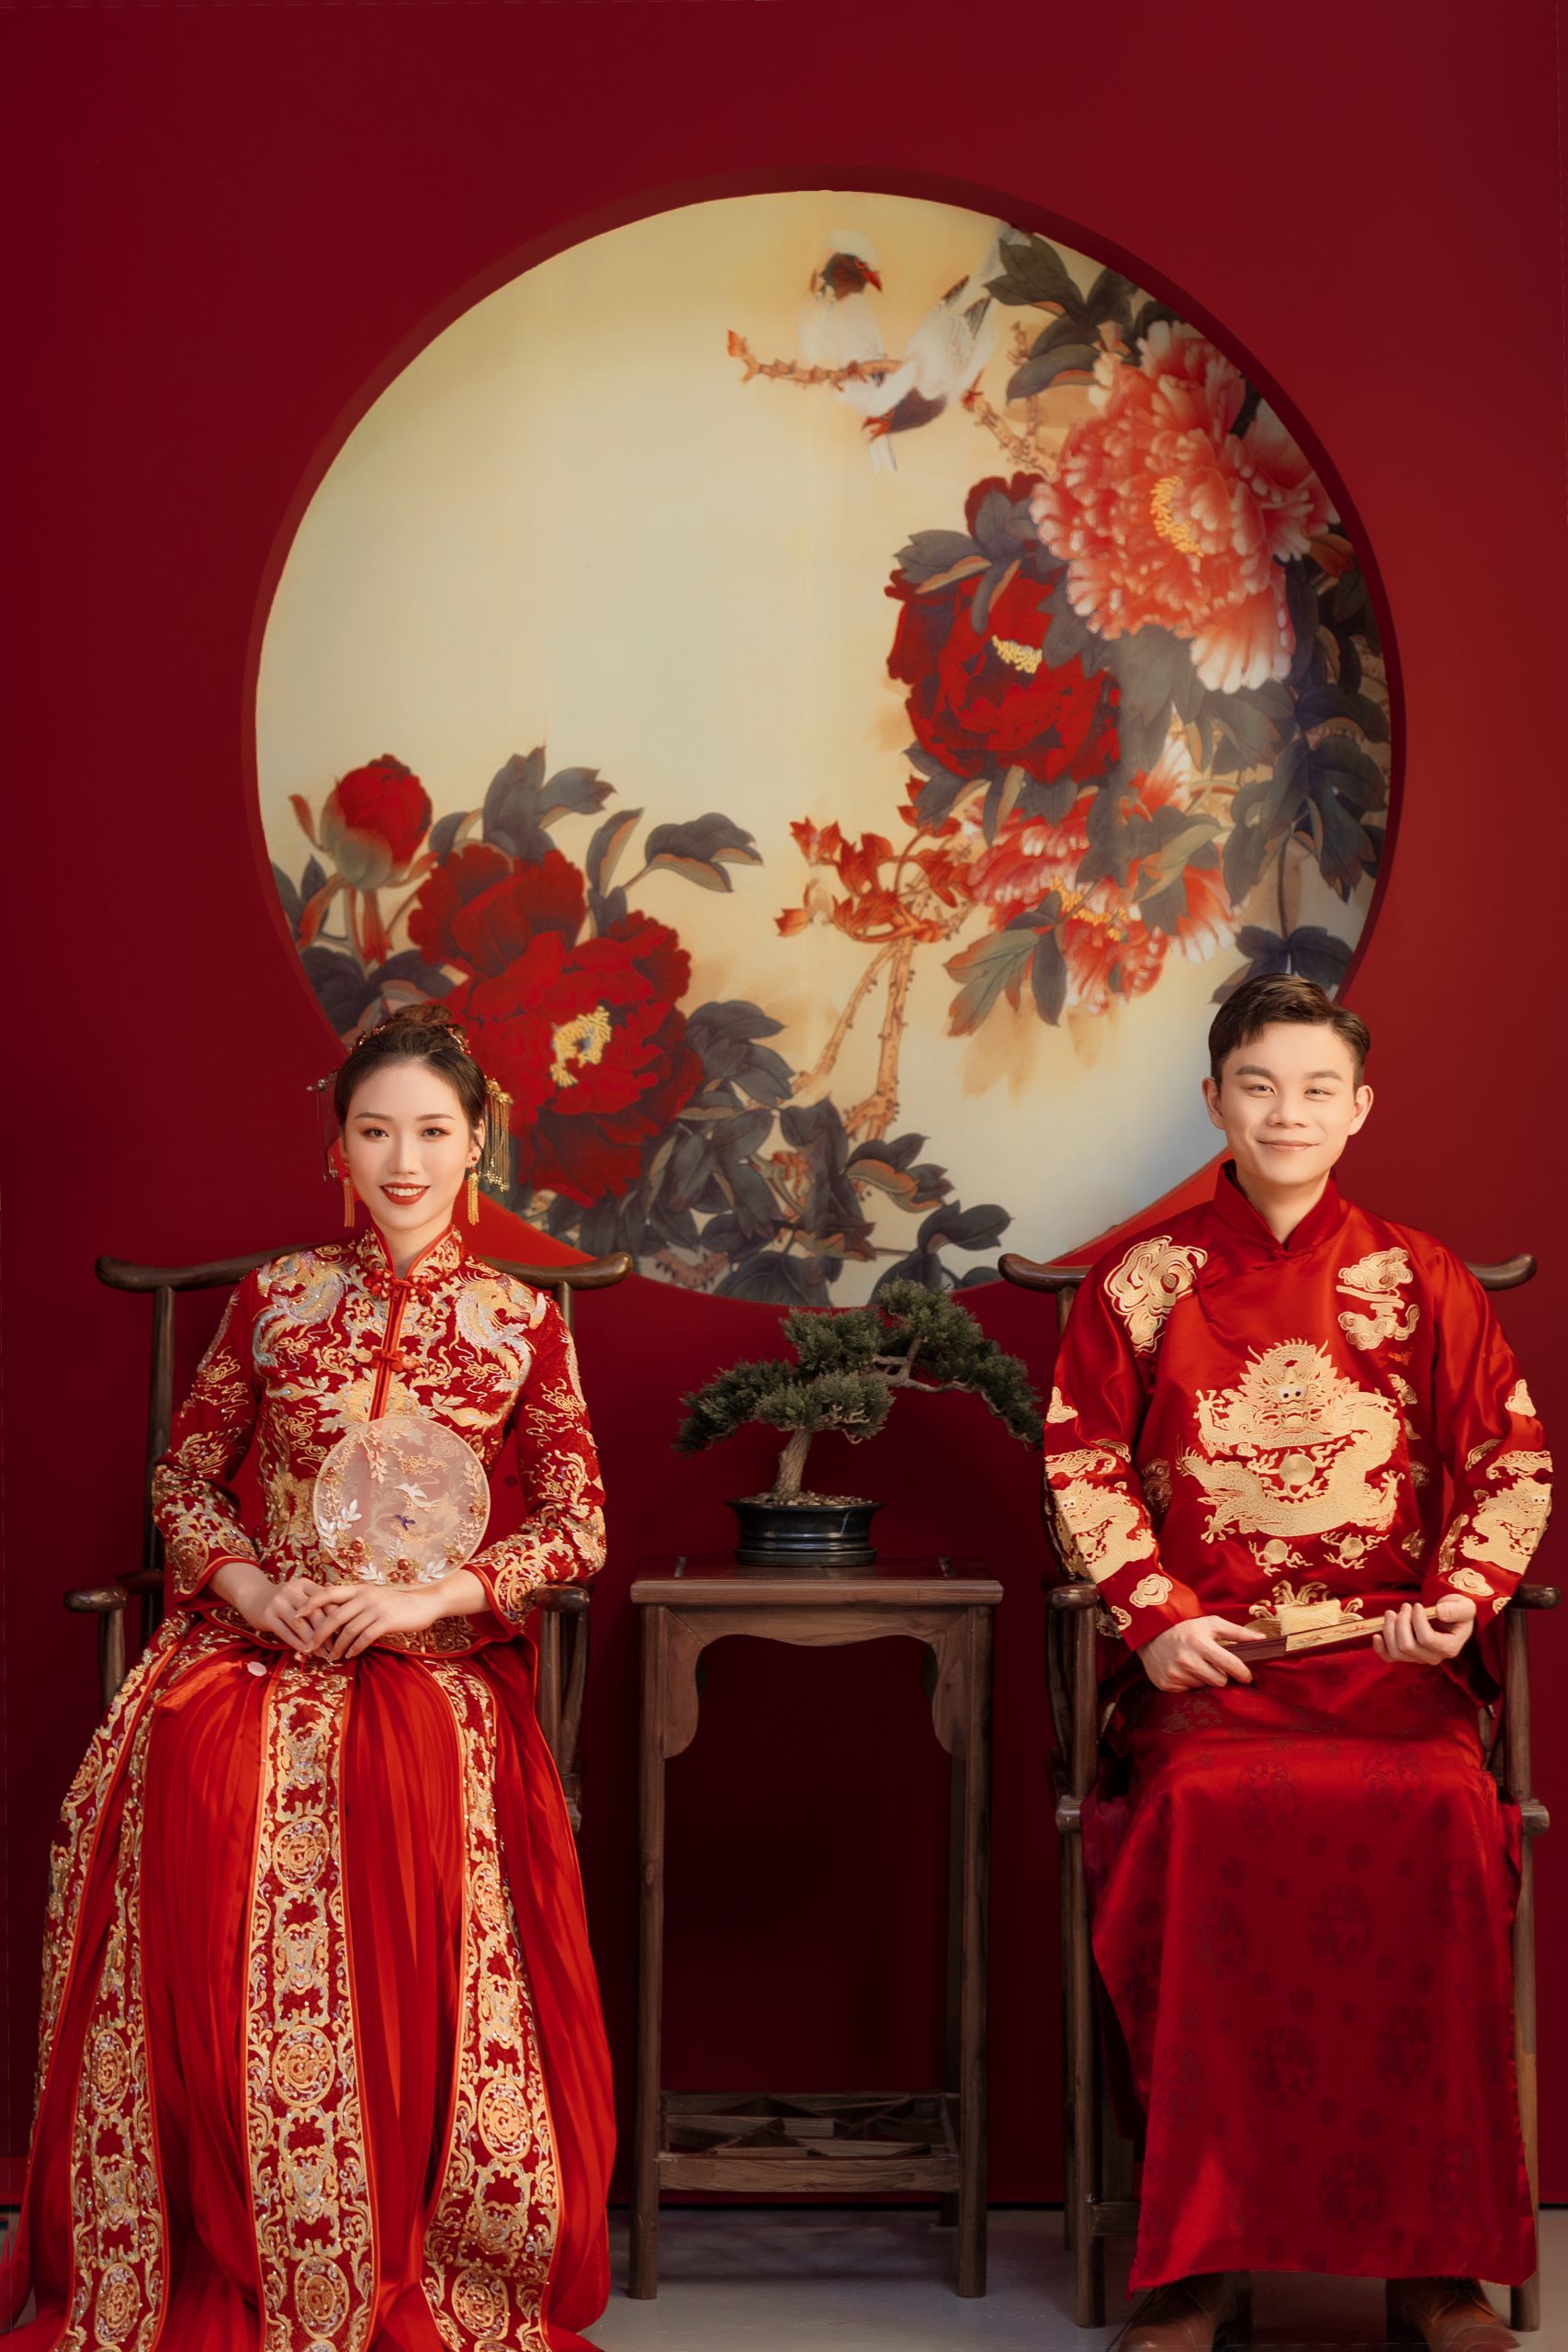 Traditional Chinese Wedding by Orchid Photo Studio Spirited Away inspired wedding photography